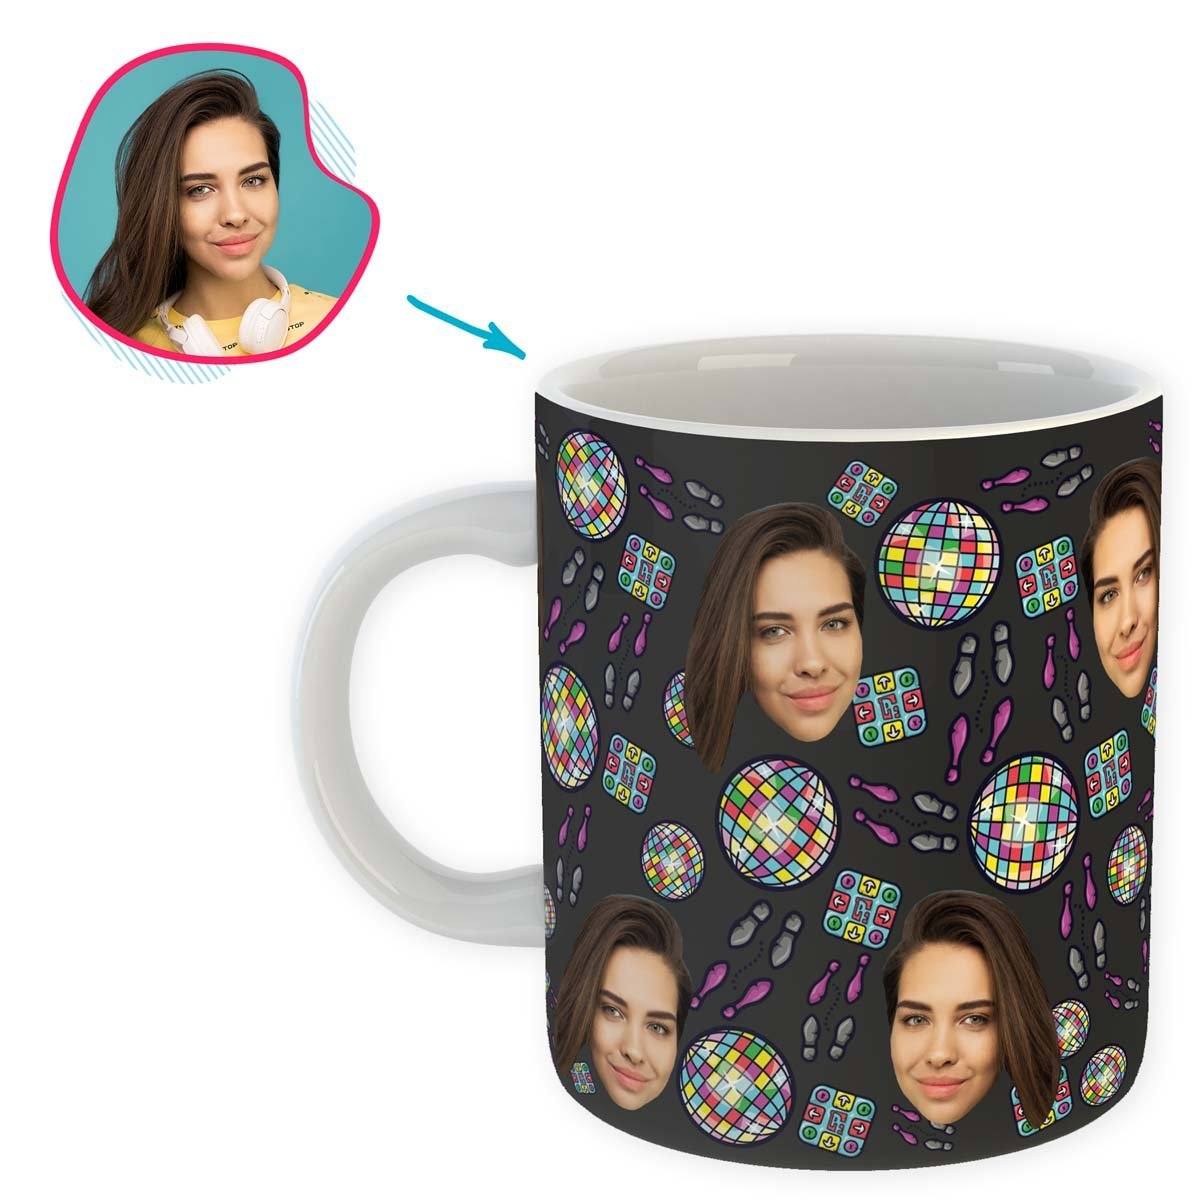 dark Dancing mug personalized with photo of face printed on it